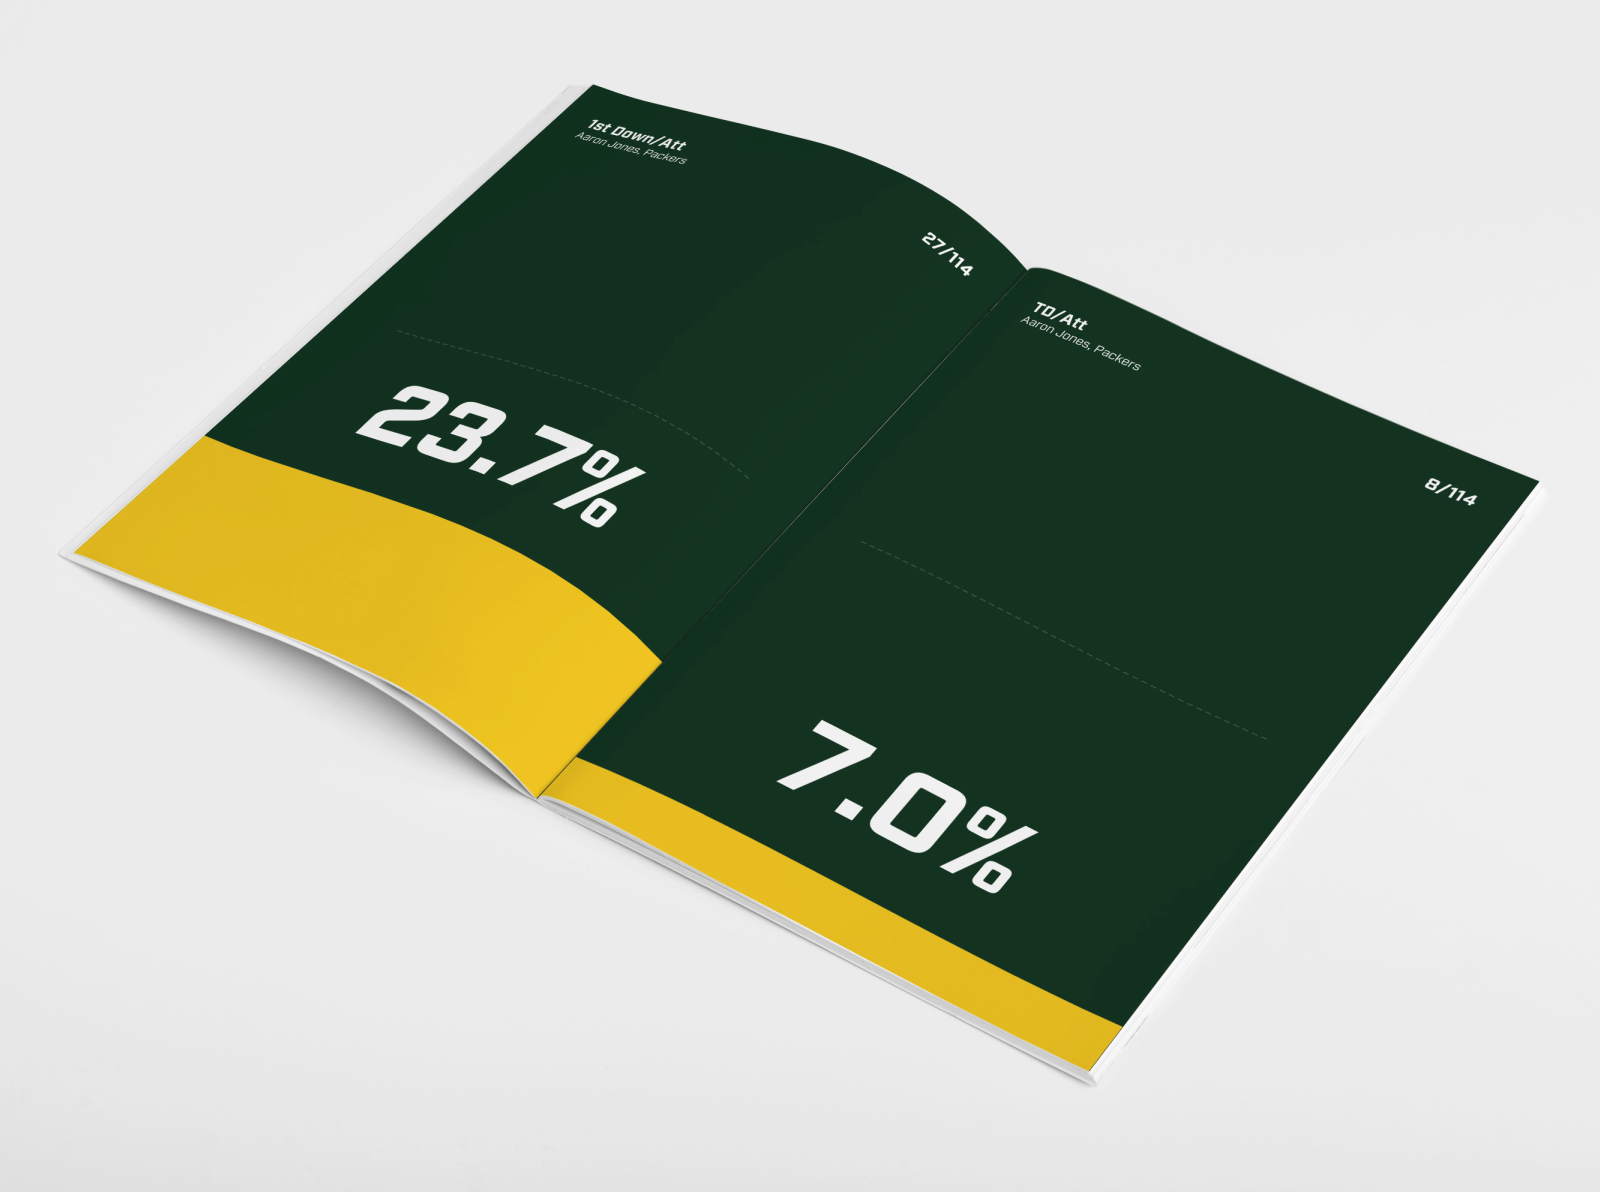 NFL Stats report by Adrien Heury on Dribbble